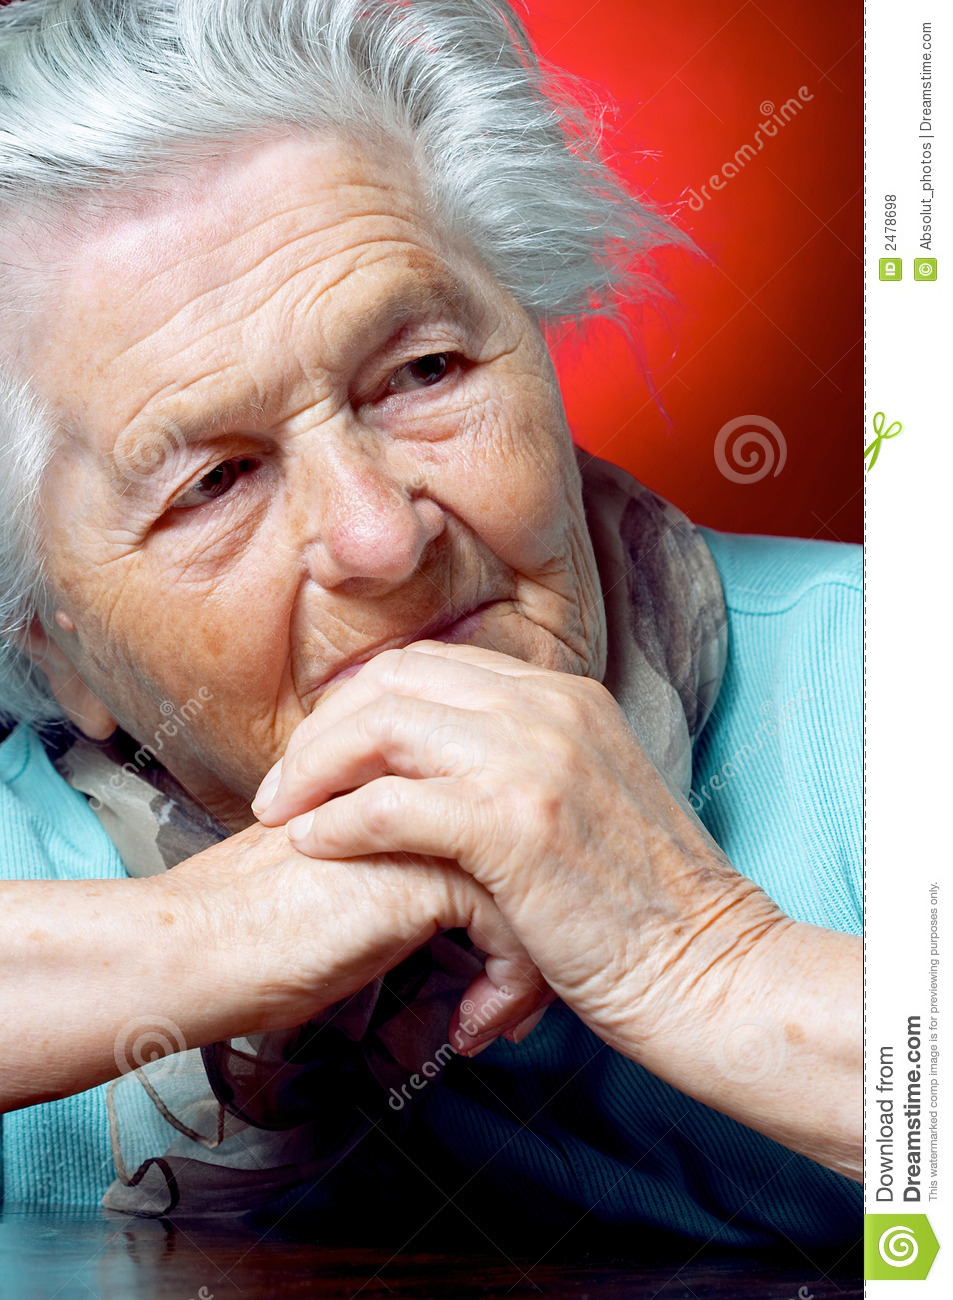 Royalty Free Images of Elderly People